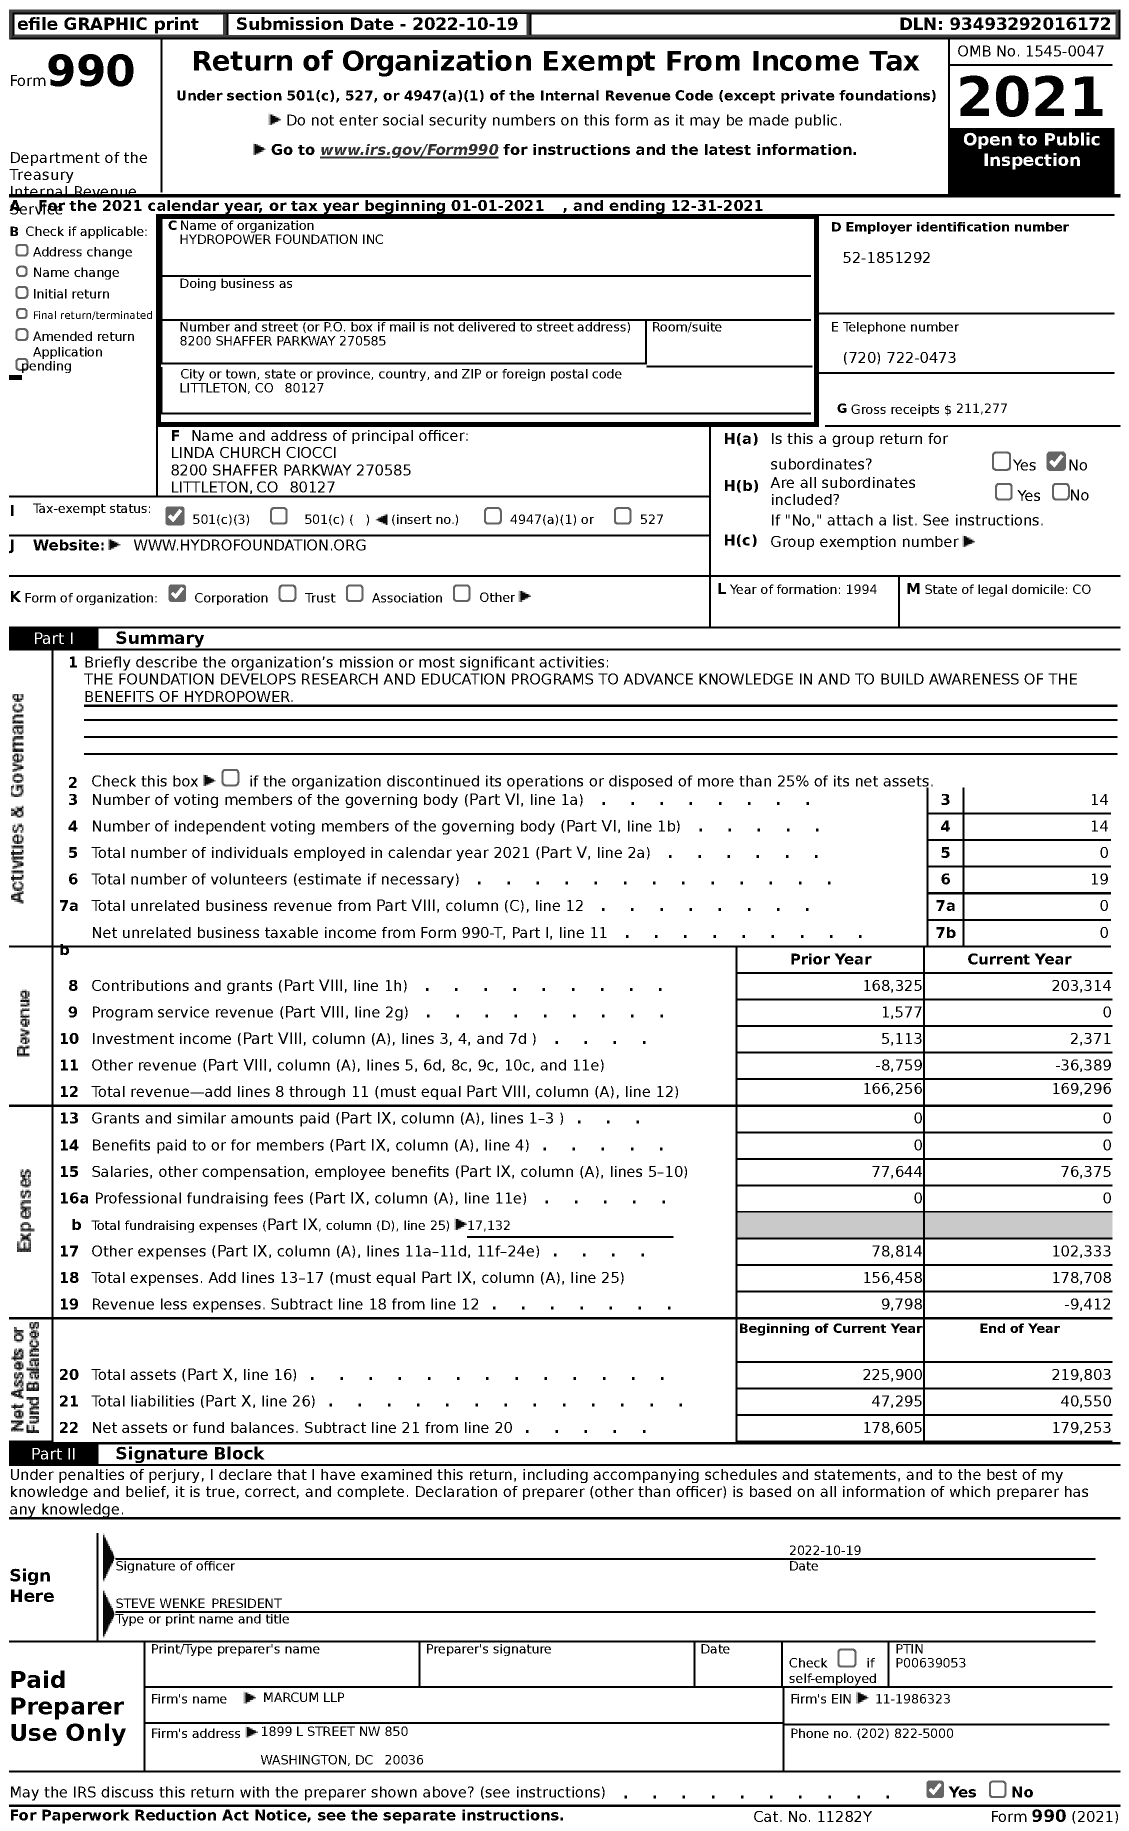 Image of first page of 2021 Form 990 for Hydropower Foundation (HRF)